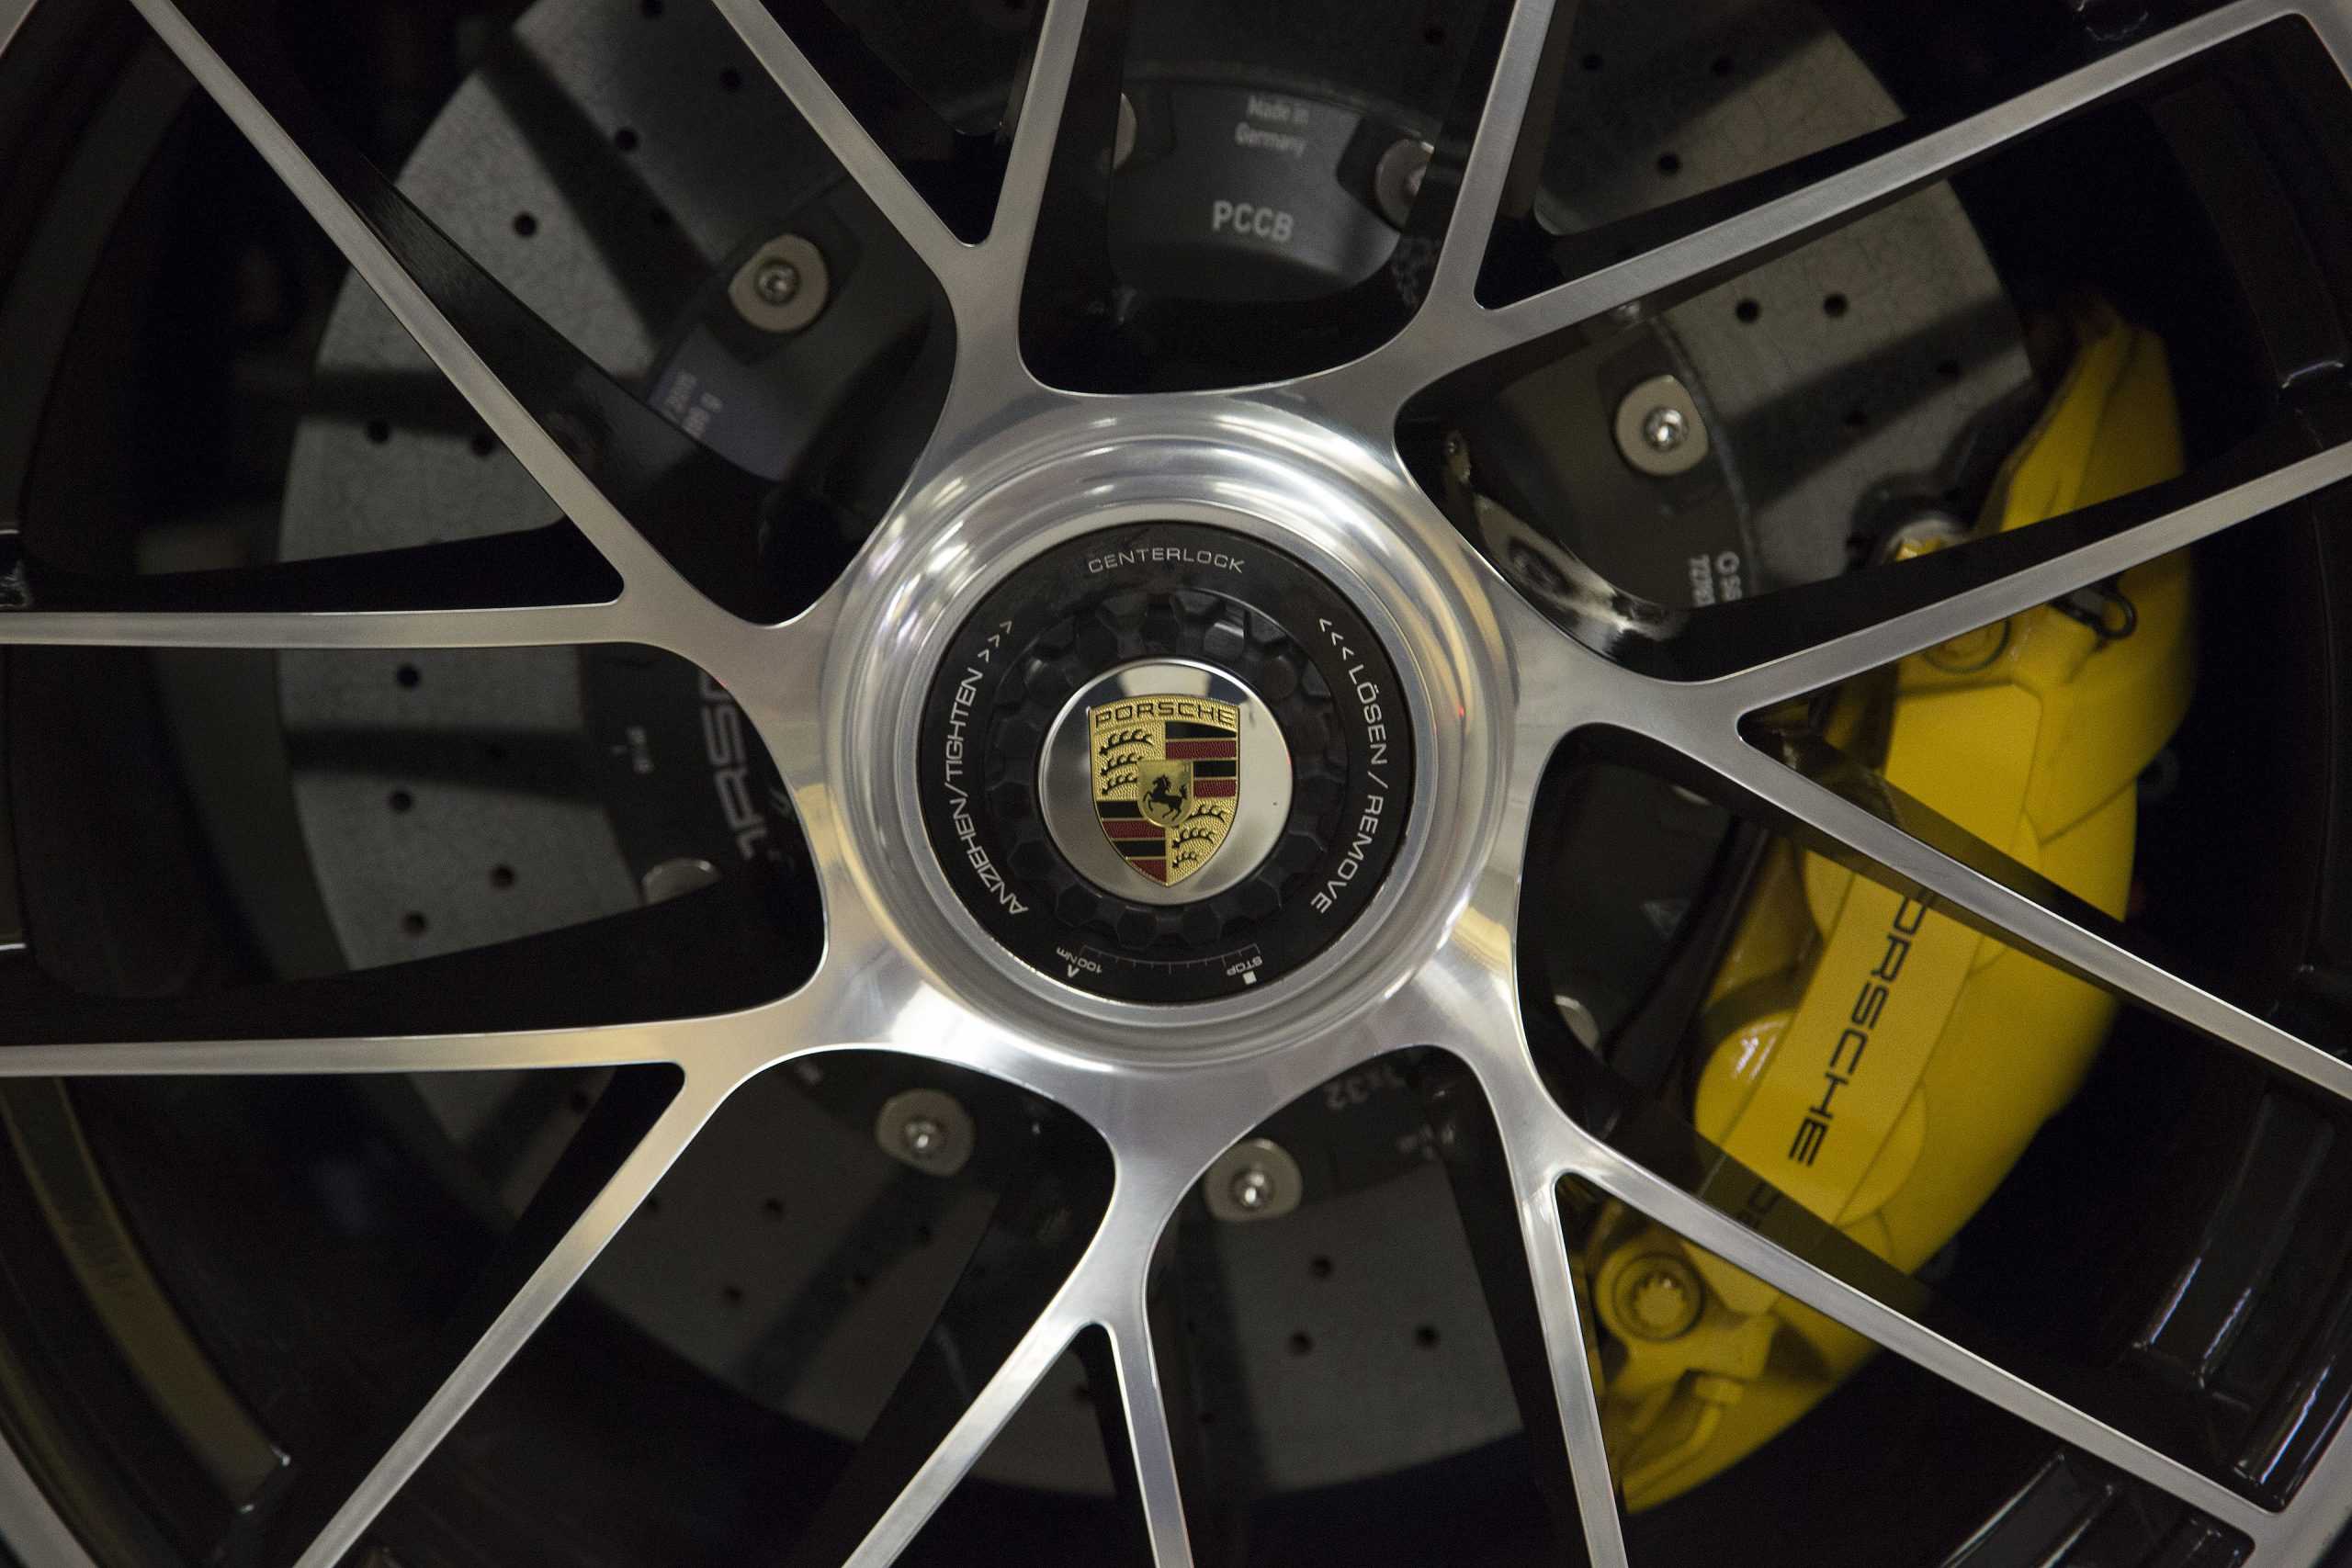 The 2017 Porsche 911 Turbo S gets centerlock wheel nuts. The Turbo S cranks out 580 horsepower from its turbo 3.8-liter, flat-six engine on September 16, 2016 in La Canada, Calif. (Myung J. Chun / Los Angeles Times)